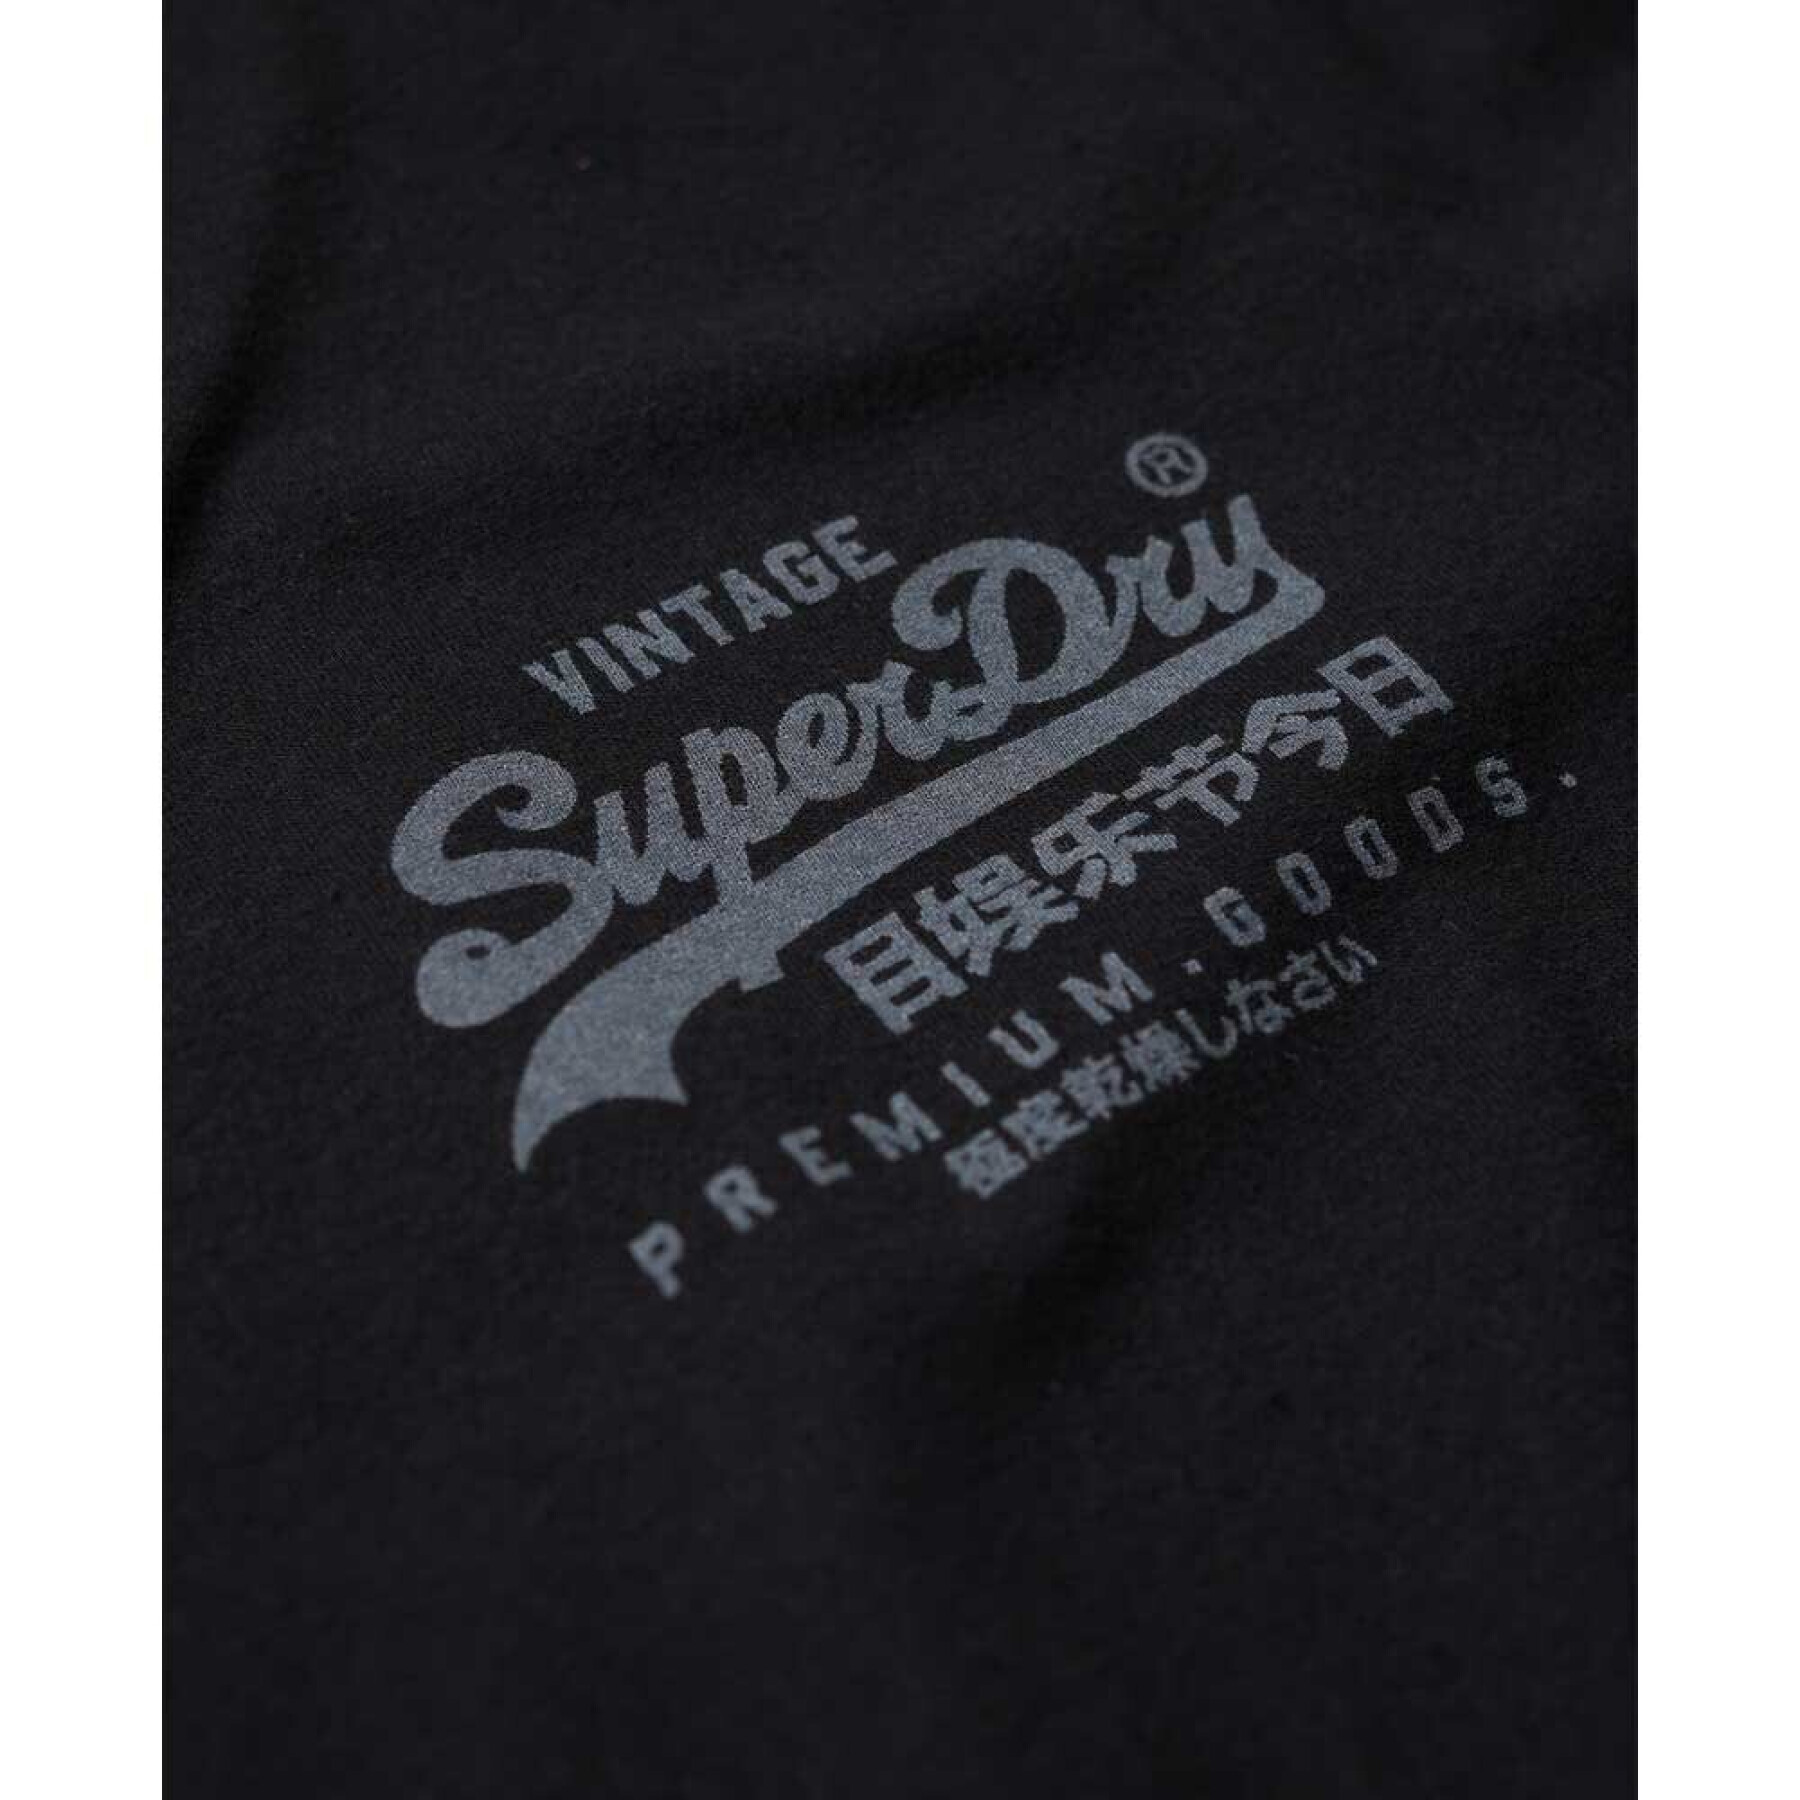 T-shirt Superdry Classic Vl Heritage